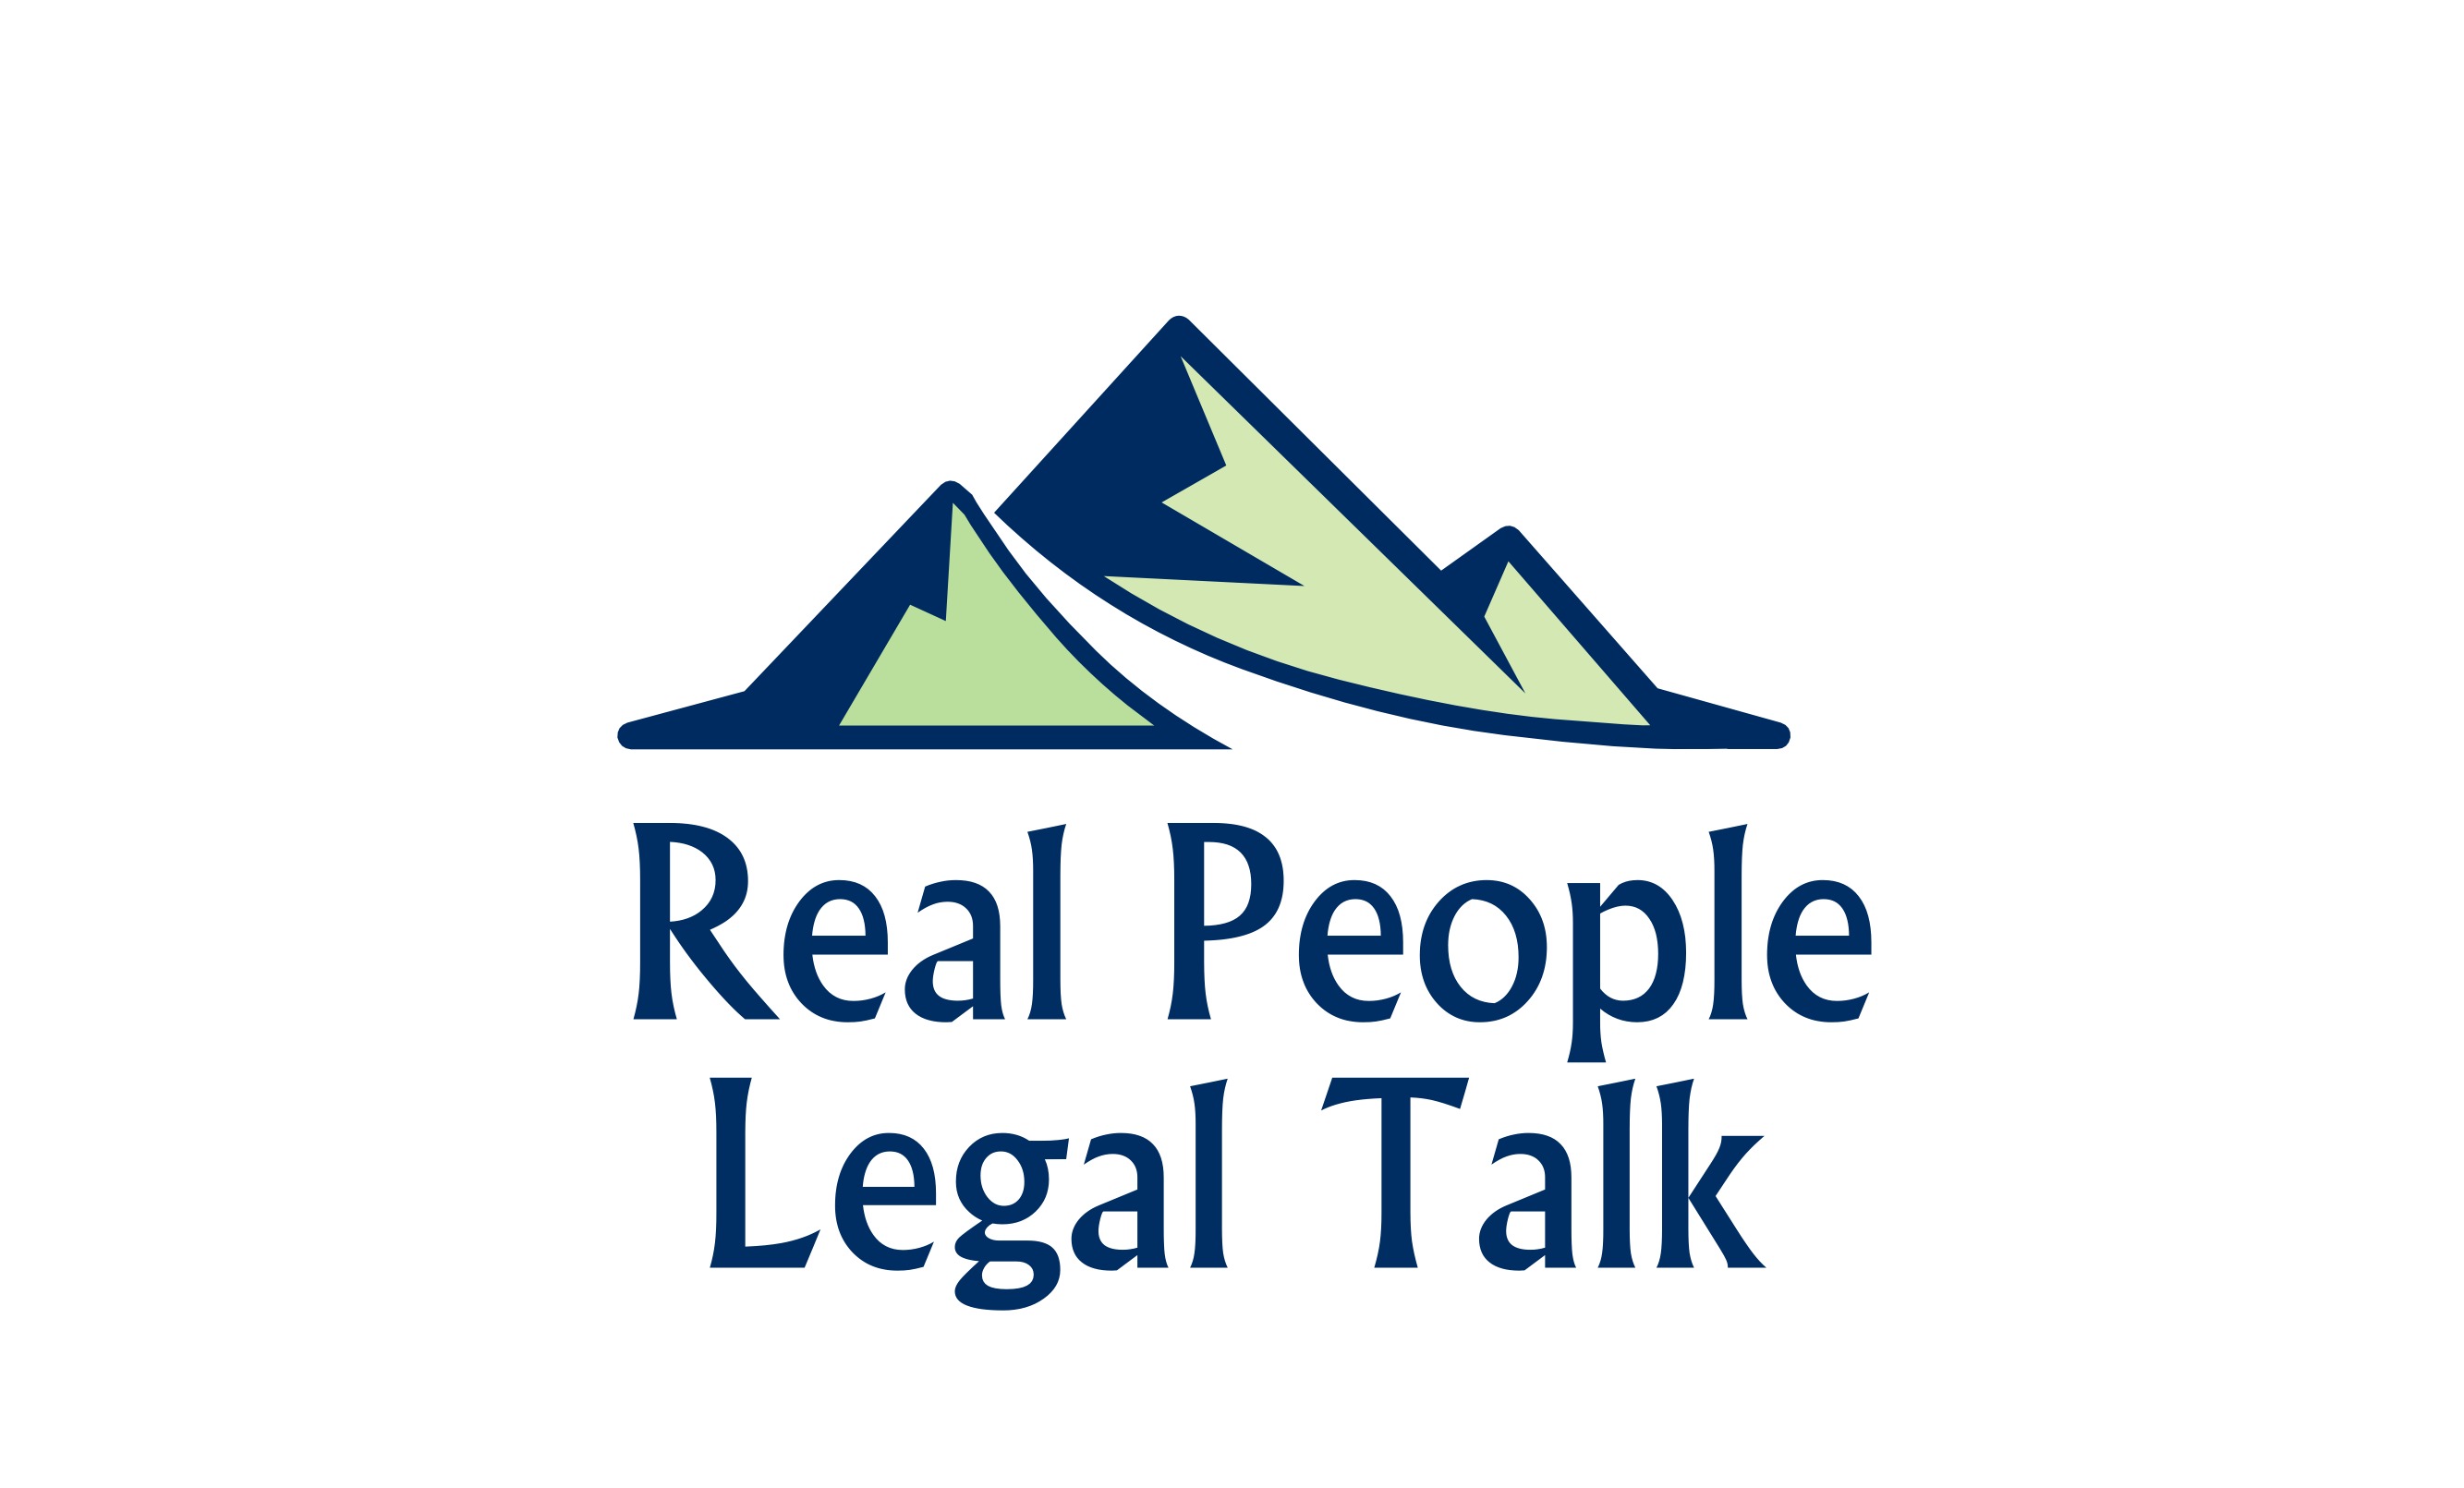 Introduction to Real People Legal Talk